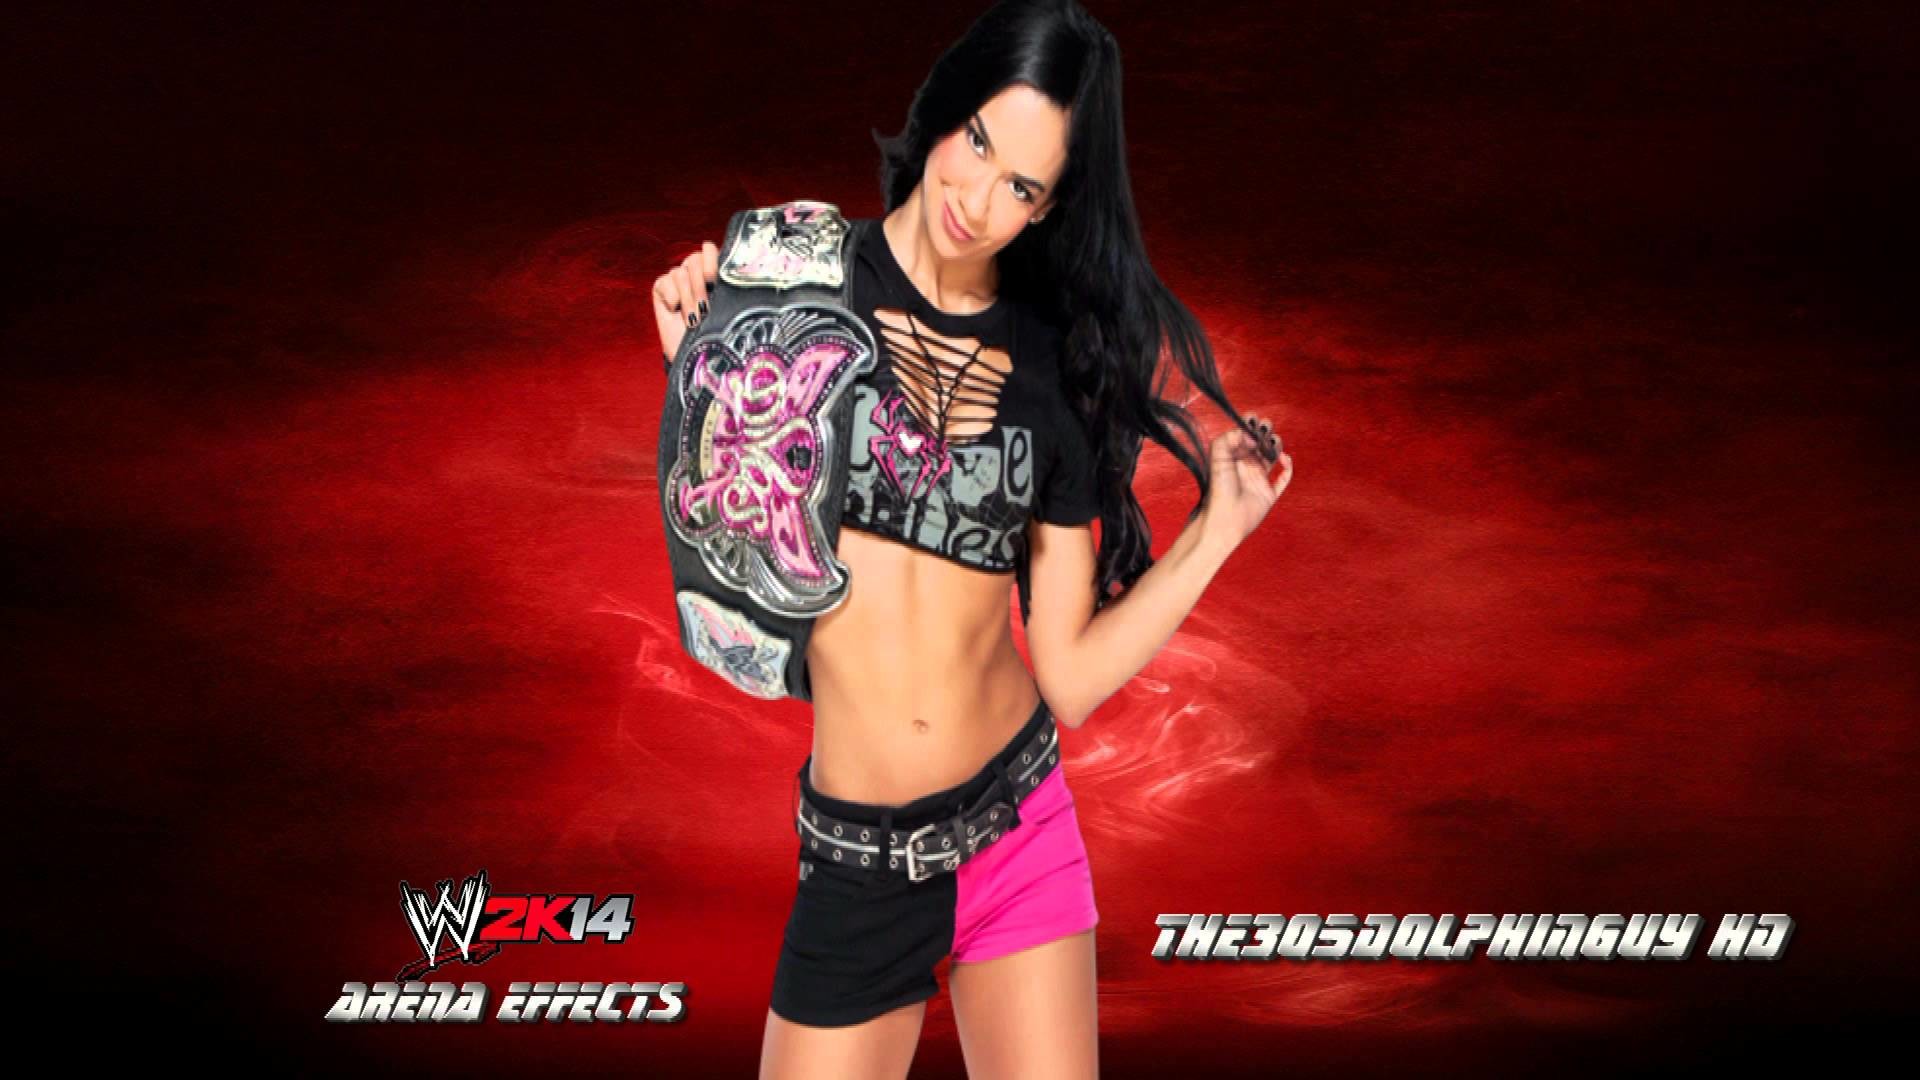 1920x1080 #WWE: AJ Lee 4th Theme - Let's Light it Up (HQ + WWE Edit + Arena Effects)  - YouTube